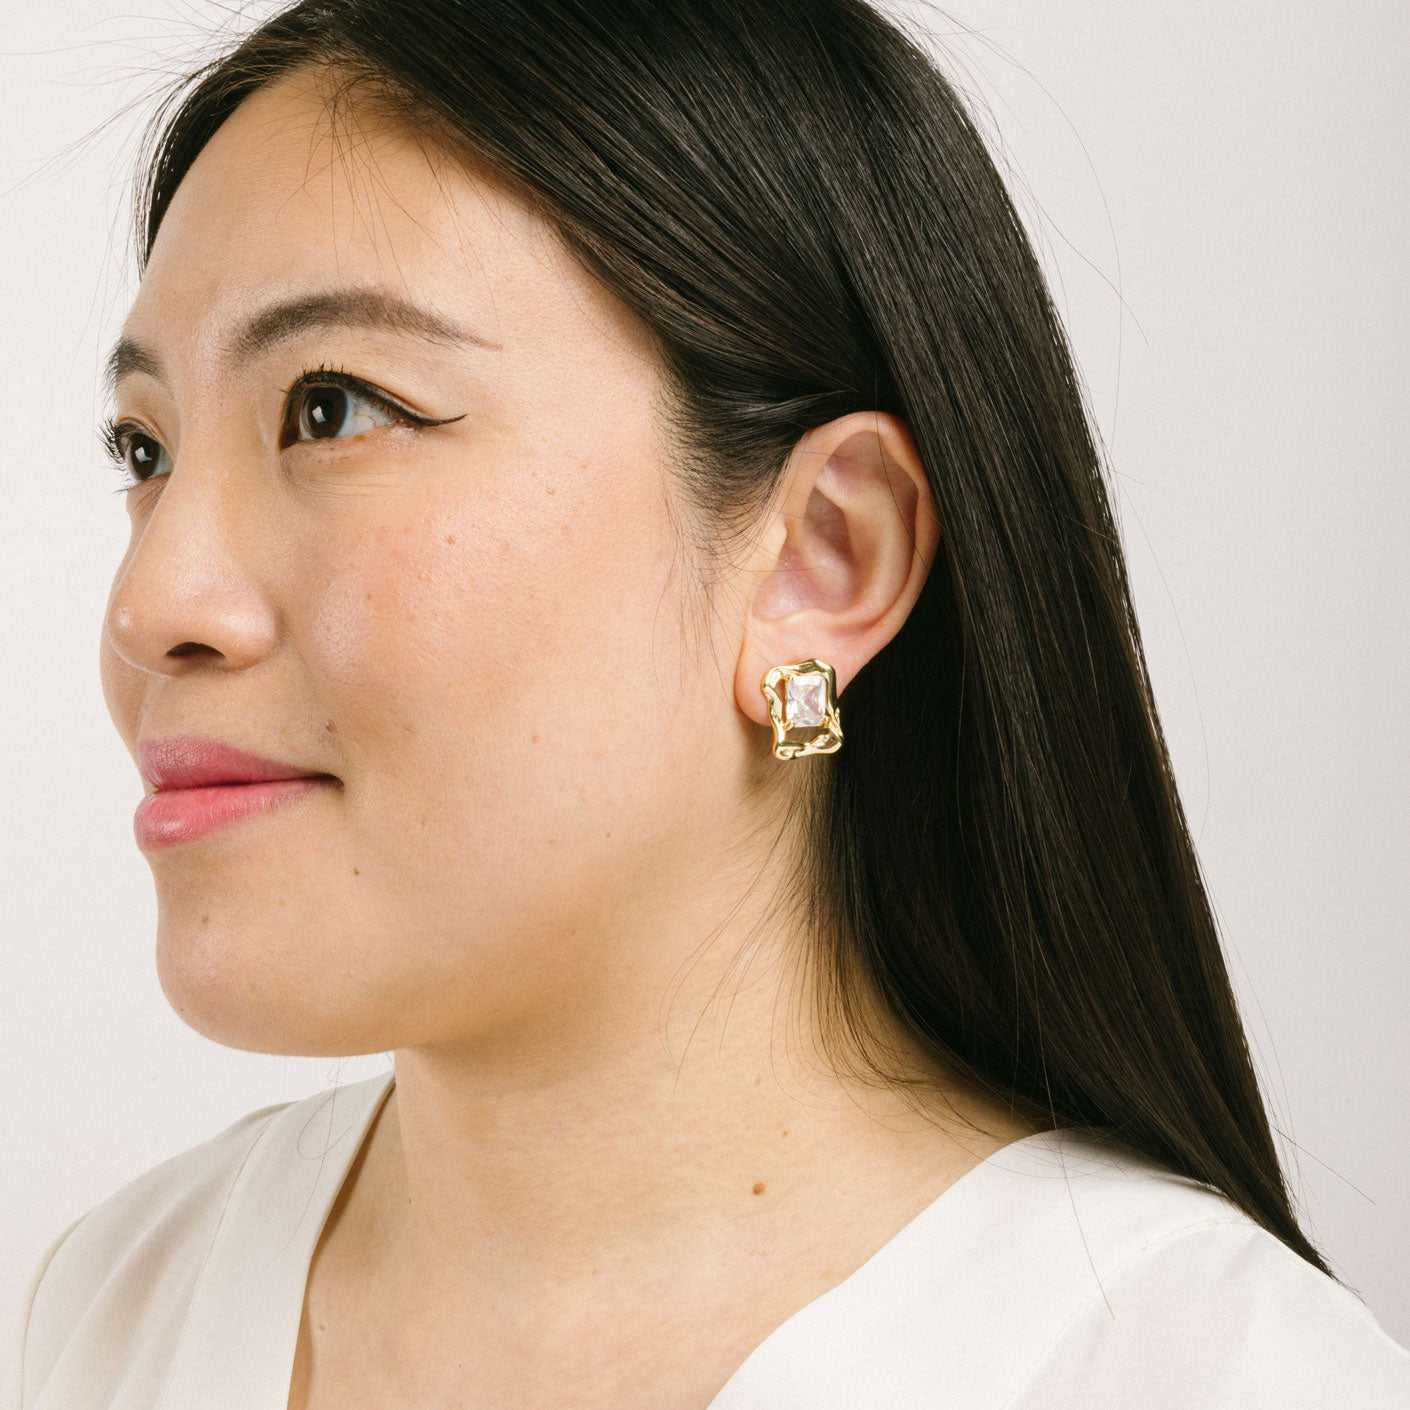 A model wearing the Valerie Clip On Earrings in Gold feature a padded clip-on closure for secure hold and comfortable wear up to 12 hours. These earrings are crafted with gold tone copper alloy and cubic zirconia, and can be worn by all ear types, including thick/large ears, sensitive ears, small/thin ears, and stretched/healing ears. Please note: one pair is included.